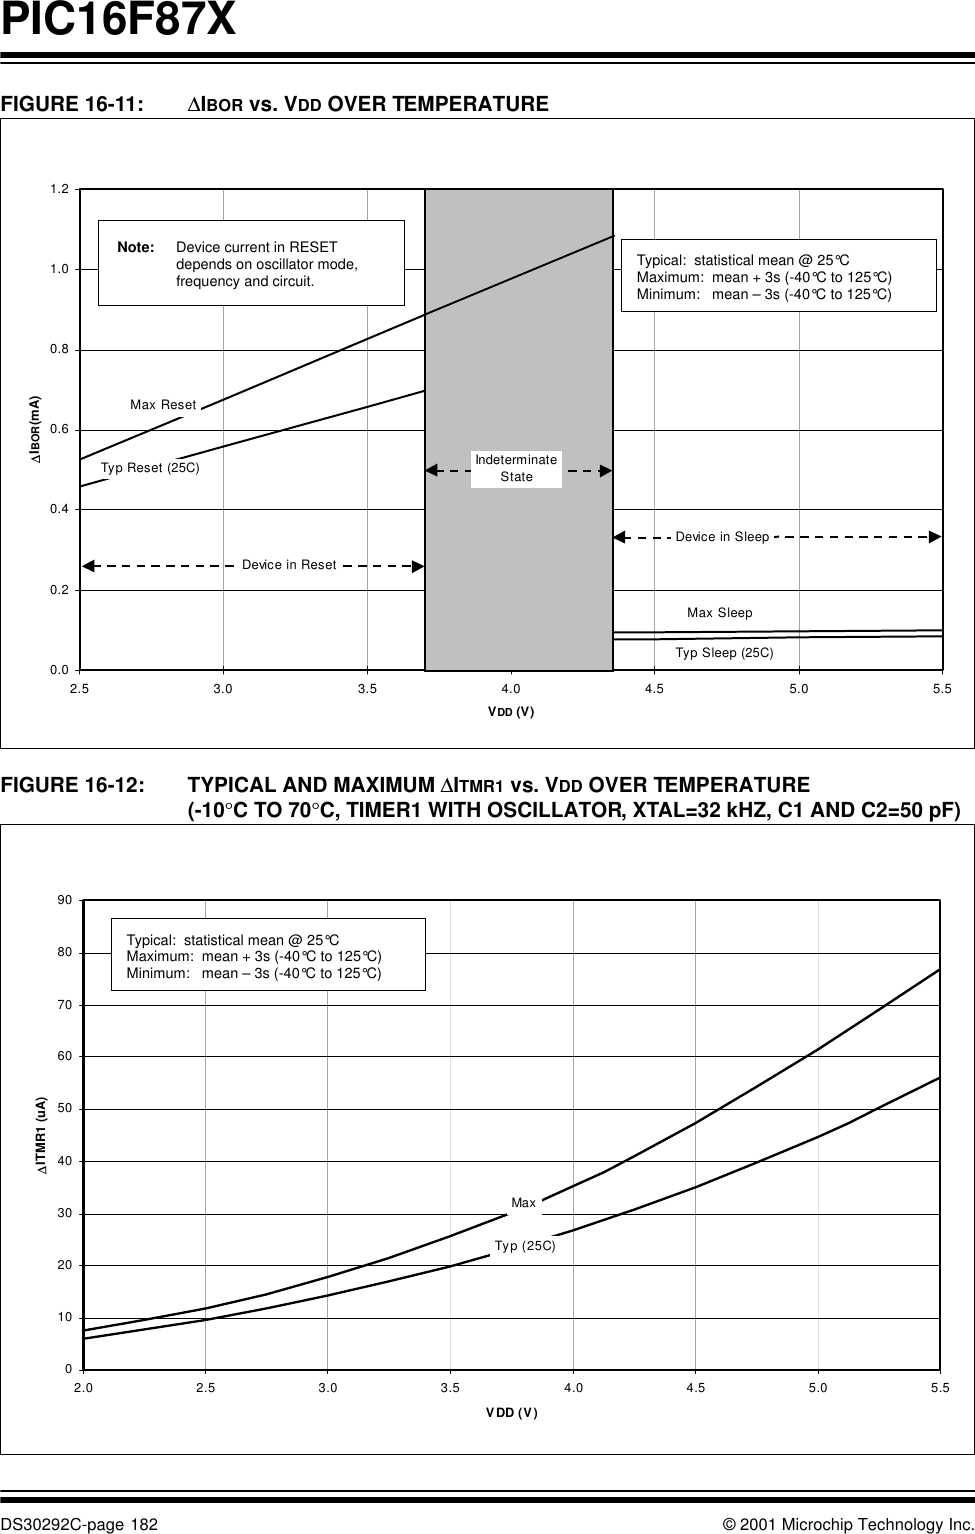 PIC16F87XDS30292C-page 182 © 2001 Microchip Technology Inc.FIGURE 16-11: ∆IBOR vs. VDD OVER TEMPERATUREFIGURE 16-12: TYPICAL AND MAXIMUM ∆ITMR1 vs. VDD OVER TEMPERATURE (-10°C TO 70°C, TIMER1 WITH OSCILLATOR, XTAL=32 kHZ, C1 AND C2=50 pF)0.00.20.40.60.81.01.22.5 3.0 3.5 4.0 4.5 5.0 5.5VDD (V)∆IBOR (mA)Device in SleepDevice in ResetMax ResetTyp Reset (25C)Max SleepTyp Sleep (25C)IndeterminateStateTypical:  statistical mean @ 25°CMaximum:  mean + 3s (-40°C to 125°C) Minimum:   mean – 3s (-40°C to 125°C)Note: Device current in RESET depends on oscillator mode, frequency and circuit.01020304050607080902.0 2.5 3.0 3.5 4.0 4.5 5.0 5.5VDD (V)∆ITMR1 (uA)Typ (25C)Max  Typical:  statistical mean @ 25°CMaximum:  mean + 3s (-40°C to 125°C) Minimum:   mean – 3s (-40°C to 125°C)